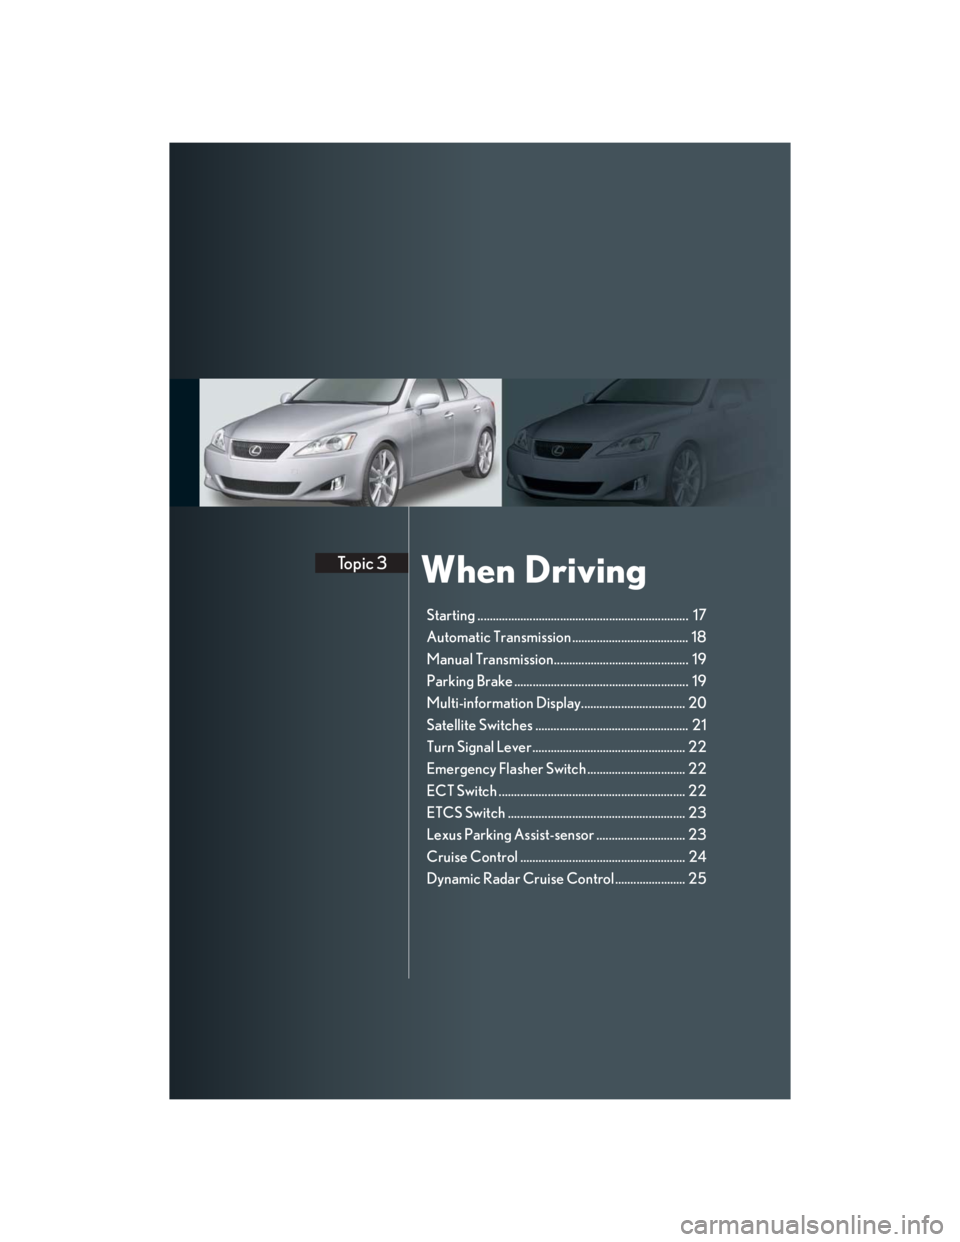 Lexus IS250 2007  Operating the lights and windshield wipers / LEXUS 2007 IS350/250 QUICK REFERENCE MANUAL When DrivingTopic 3
Starting .....................................................................  17
Automatic Transmission ......................................  18
Manual Transmission............